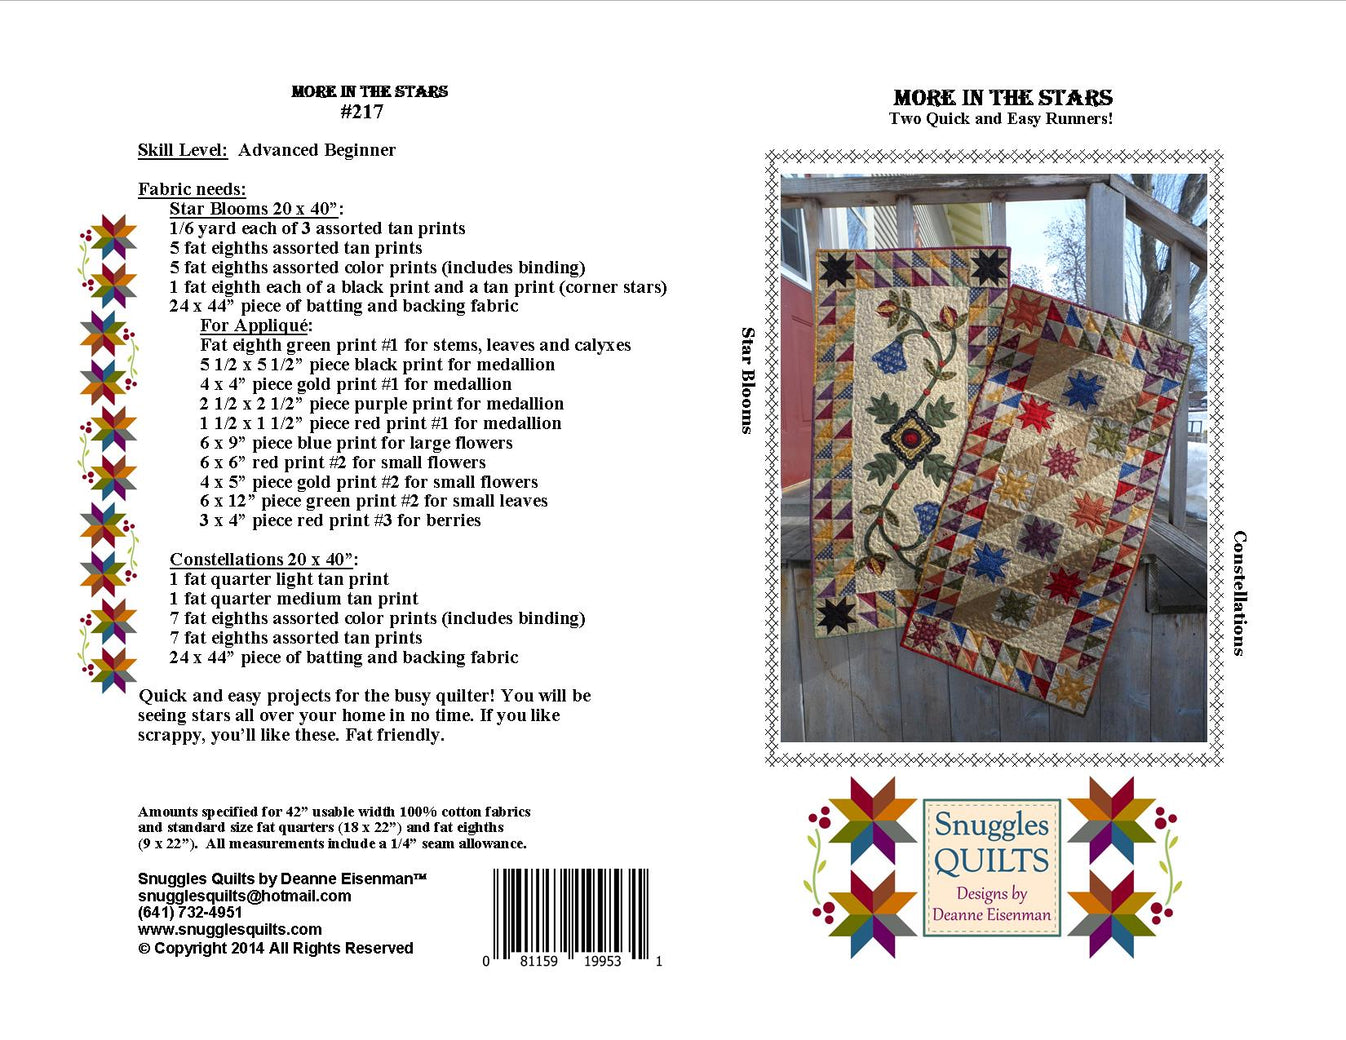 More in the Stars Quilt Pattern – Snuggles Quilts